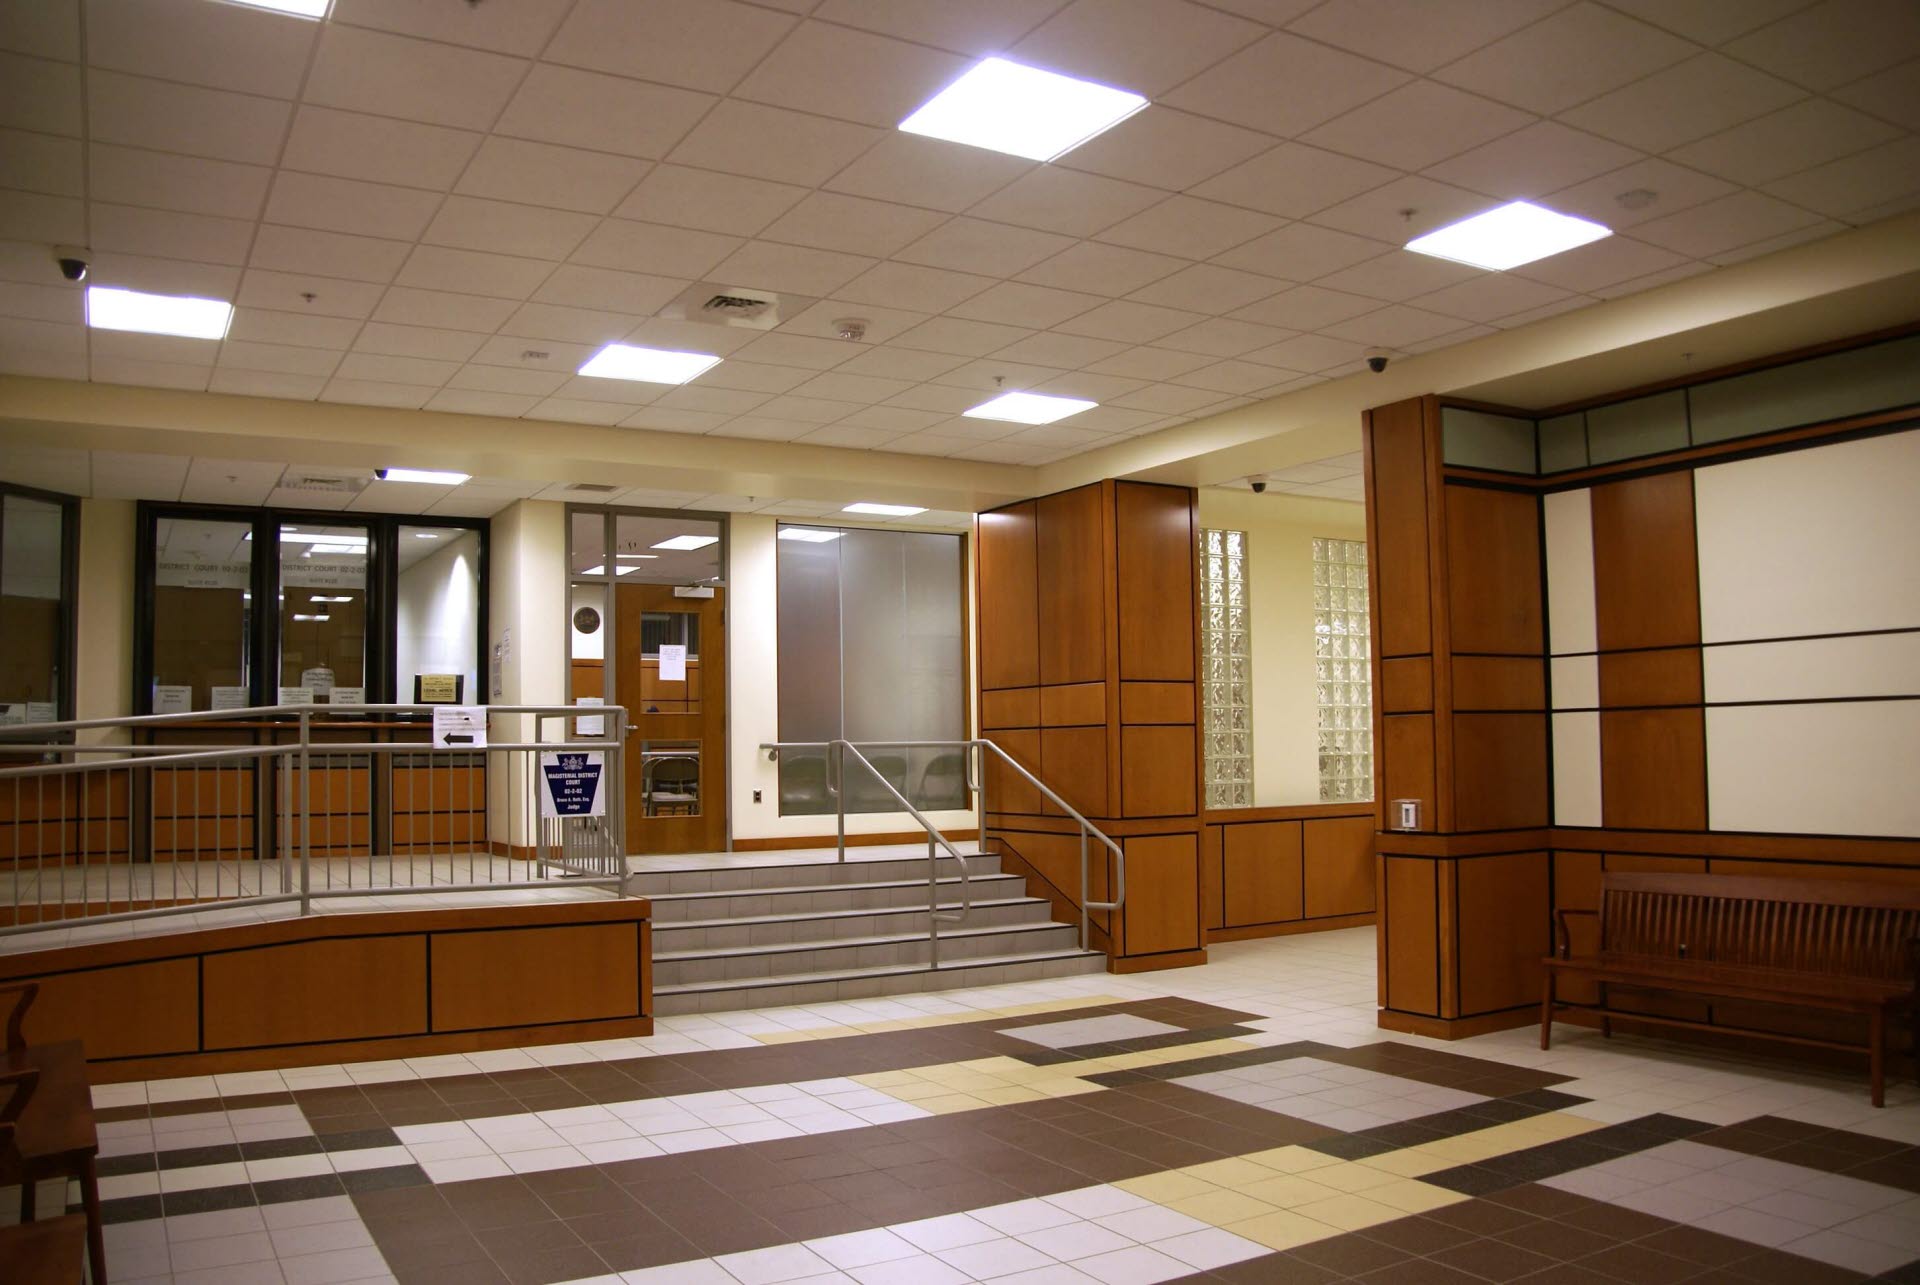 District Justice Lobby Space